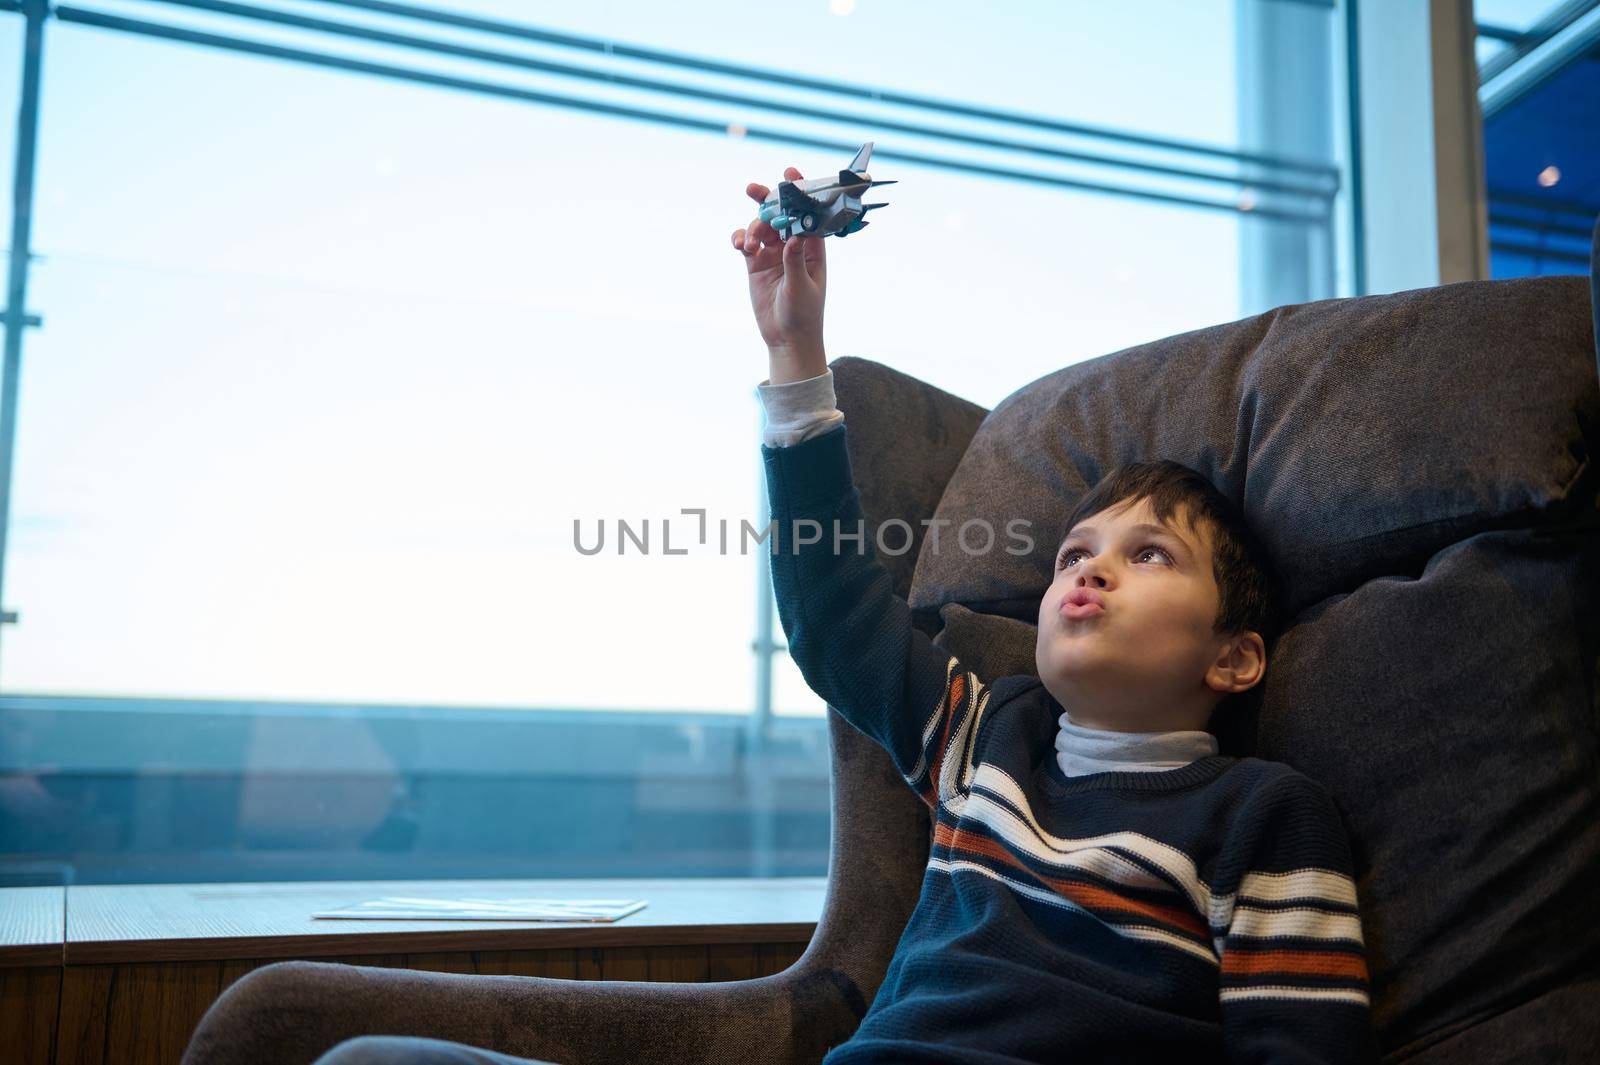 Adorable school age European boy plays toy airplane in a VIP lounge of the international airport departure terminal sitting on armchair against panoramic windows overlooking runway. Air travel concept